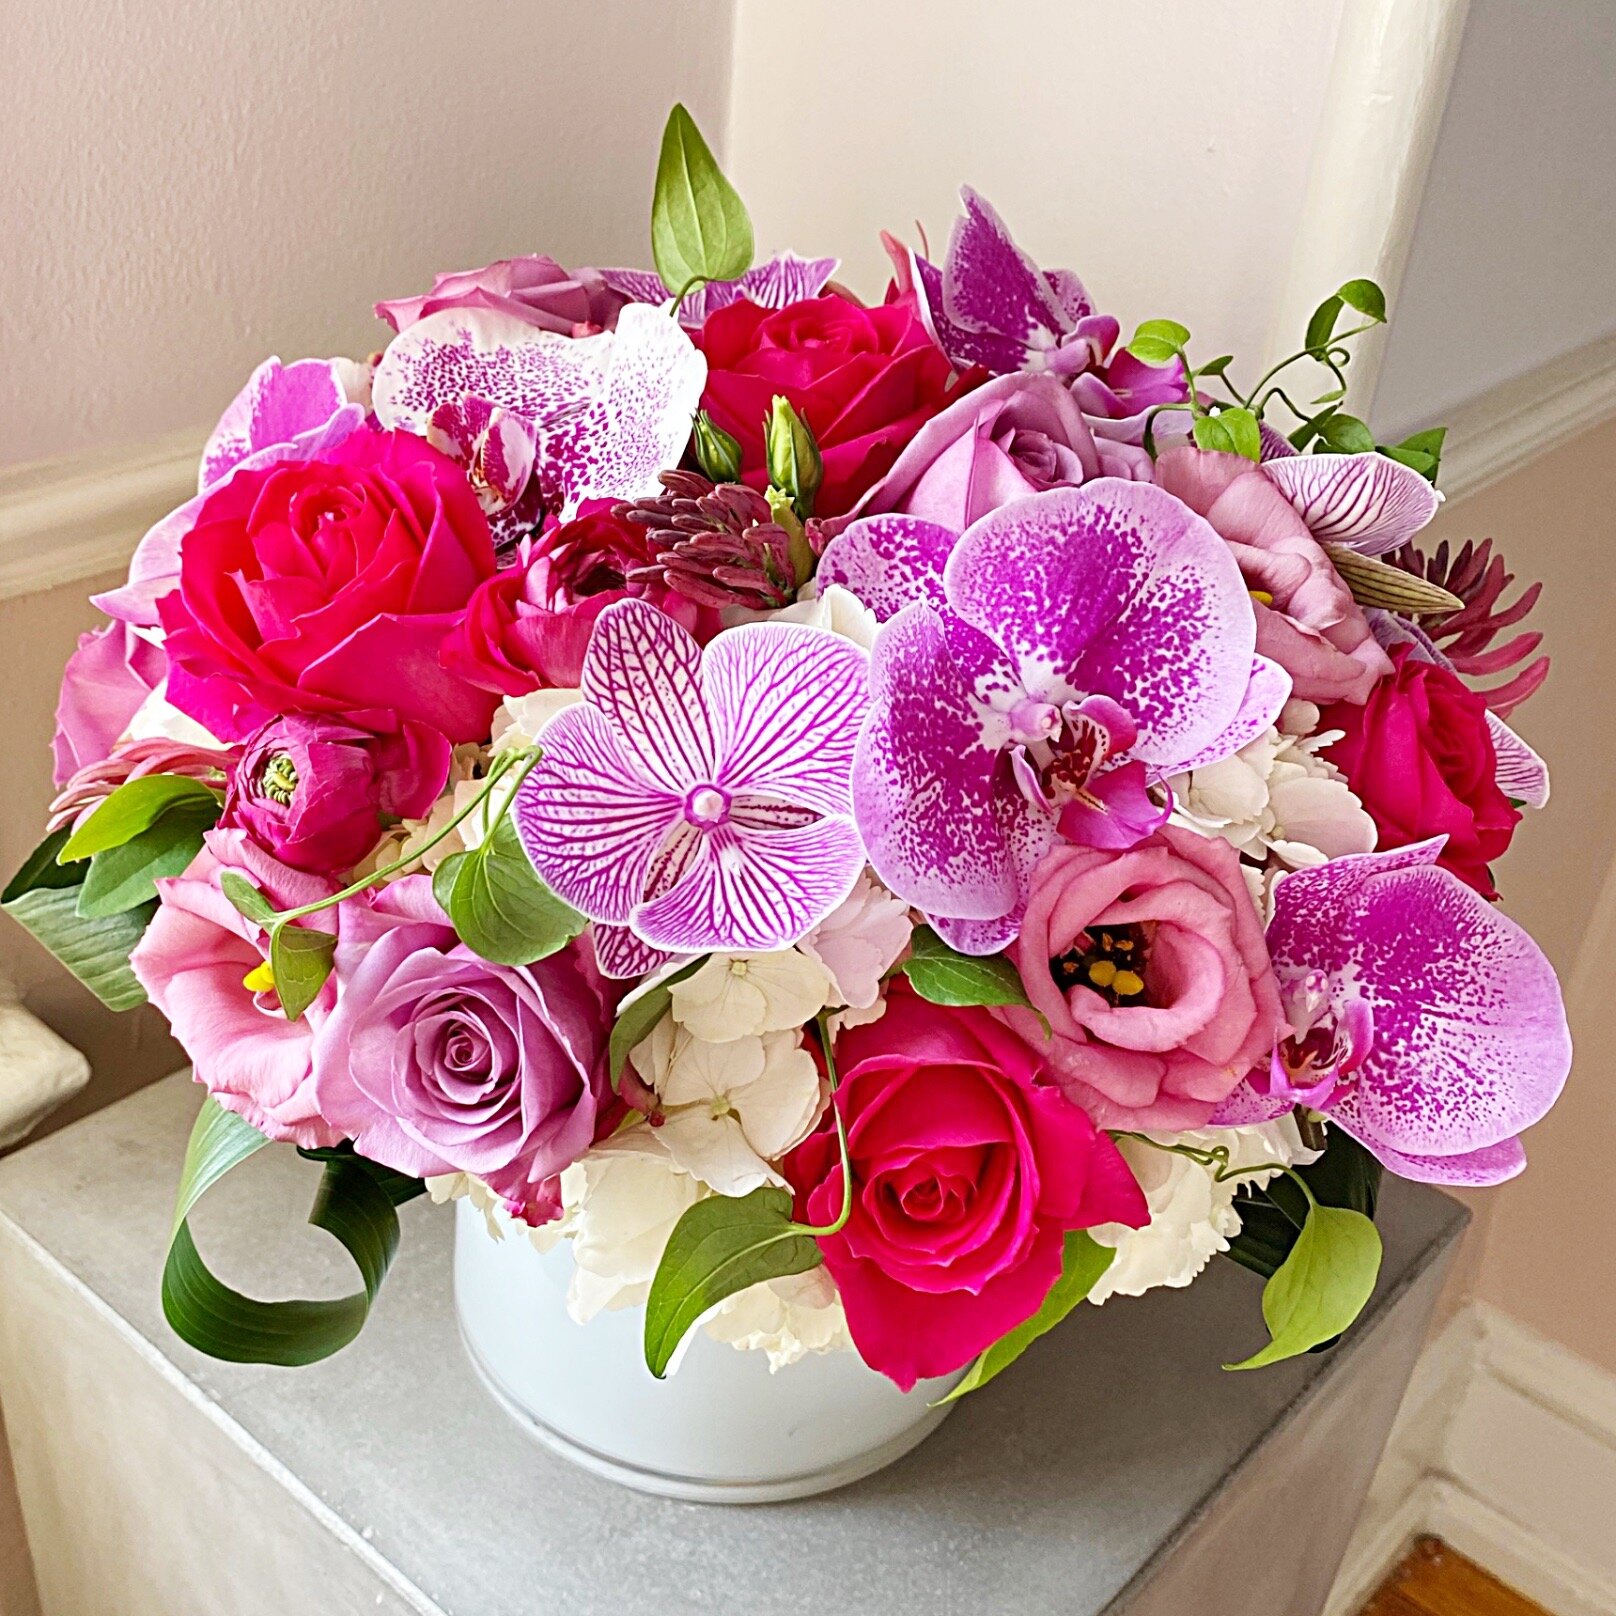 Hot Pink, Fuchsia and White flowers - Atelier Ashley Flowers